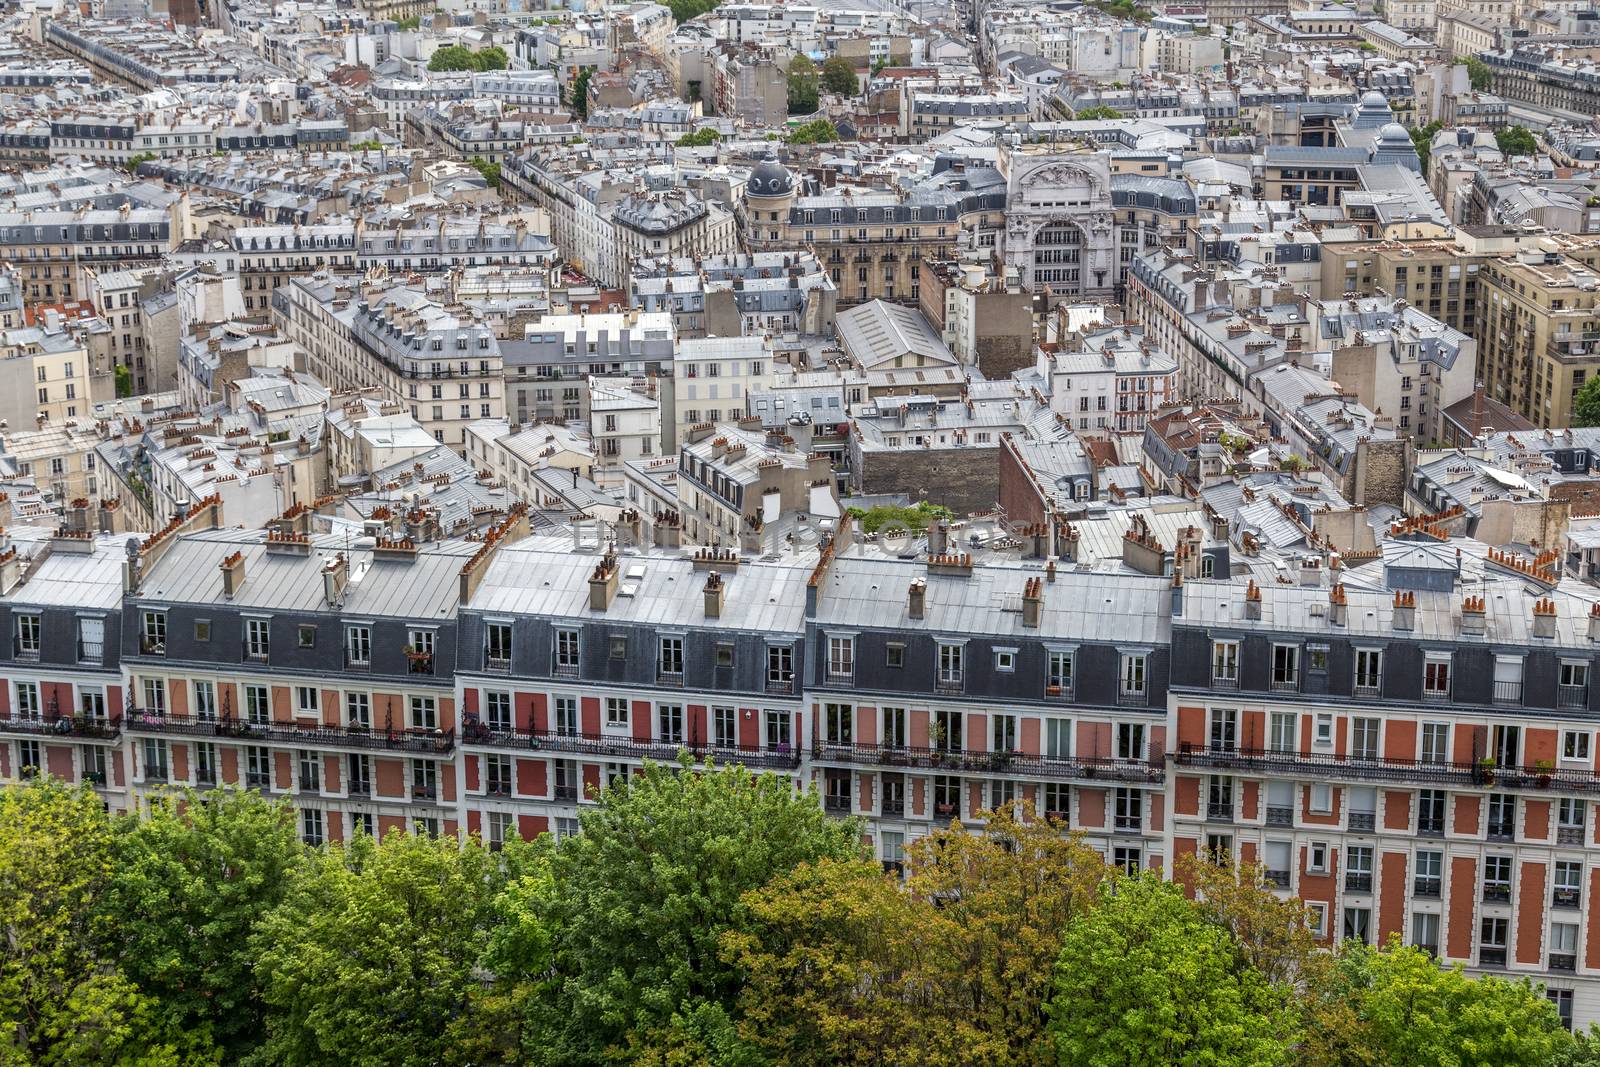 Paris, France - May 12, 2017: Rooftop view of Montmartre district from top of Sacre Coeur Basilica